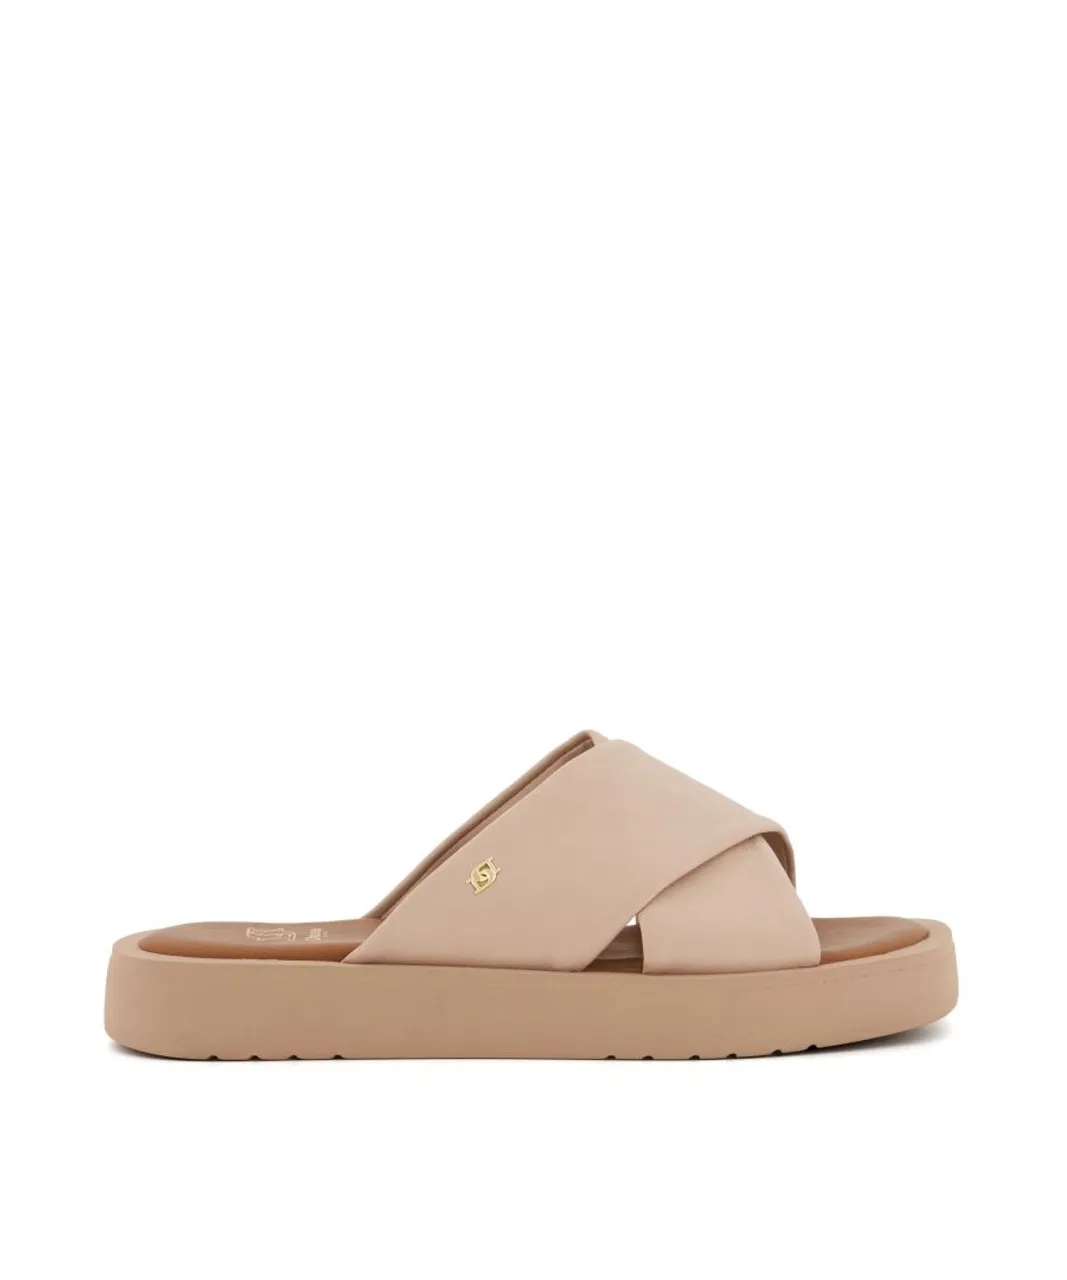 Dune London Womens Ladies Liquor - Flat Casual Sandals - Nude Leather (archived)